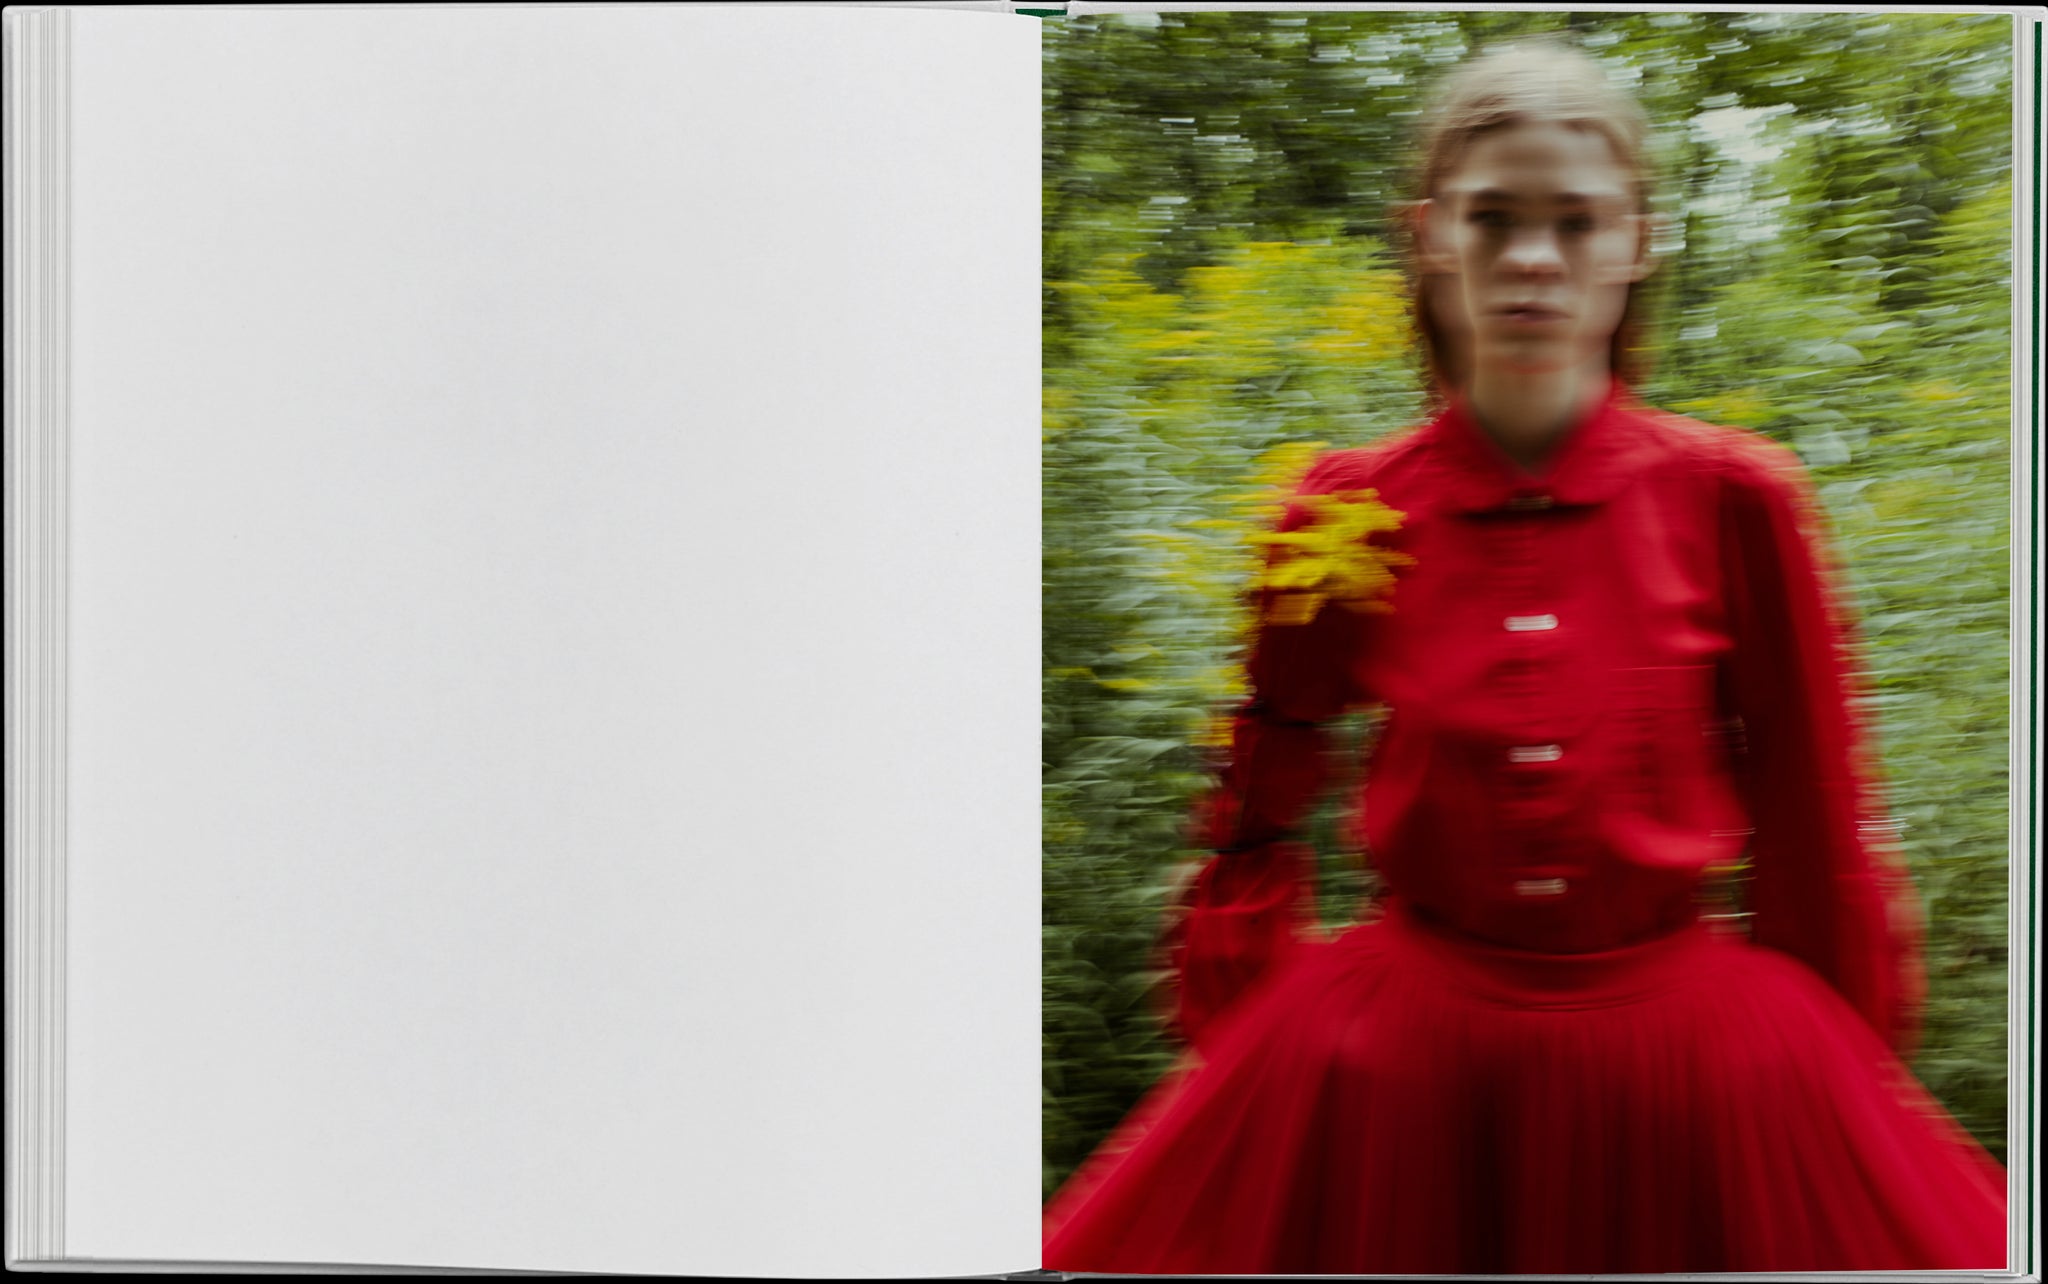 Book layout. Right: Blurred image of a girl in a red dress.